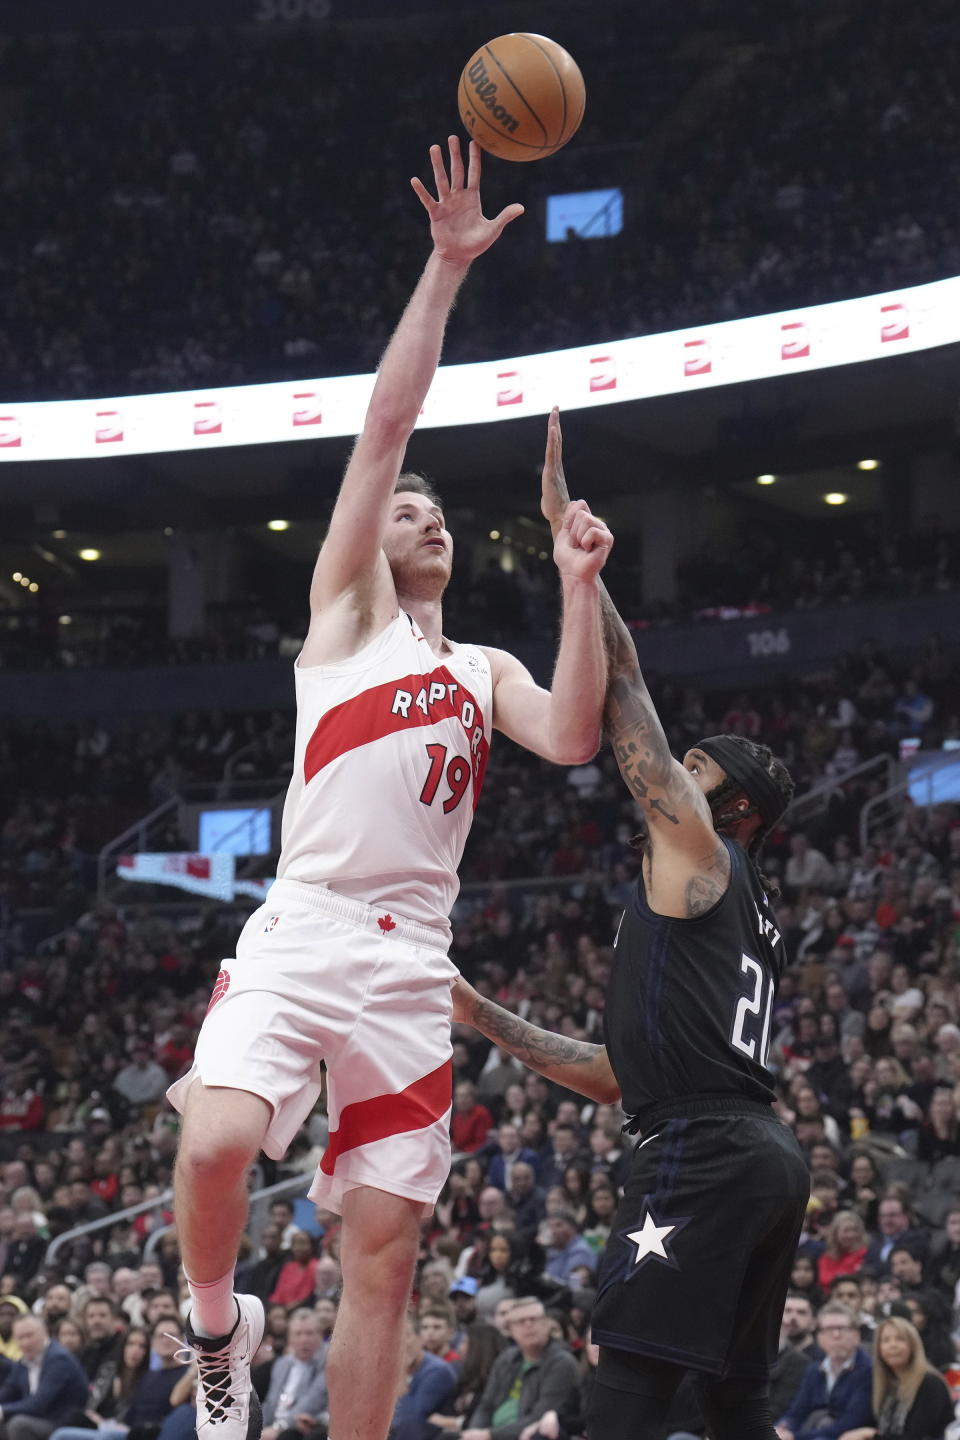 Toronto Raptors' Jacob Poeltl (19) scores on Orlando Magic's Markelle Fultz during the first half of an NBA basketball game in Toronto on Tuesday, Feb. 14, 2023. (Chris Young/The Canadian Press via AP)